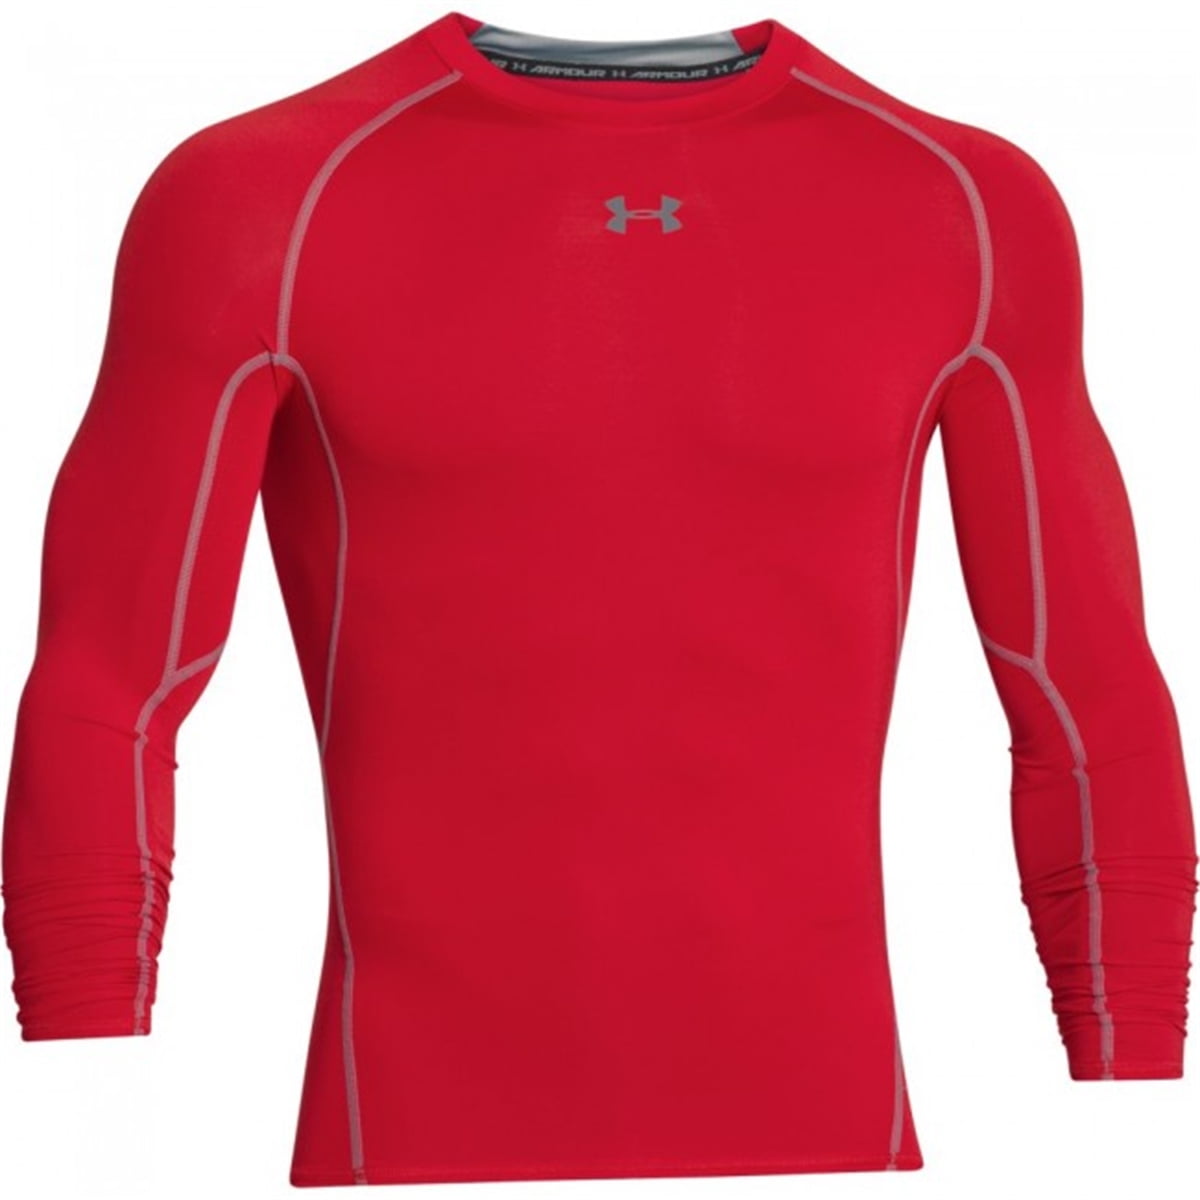 under armour long sleeve compression